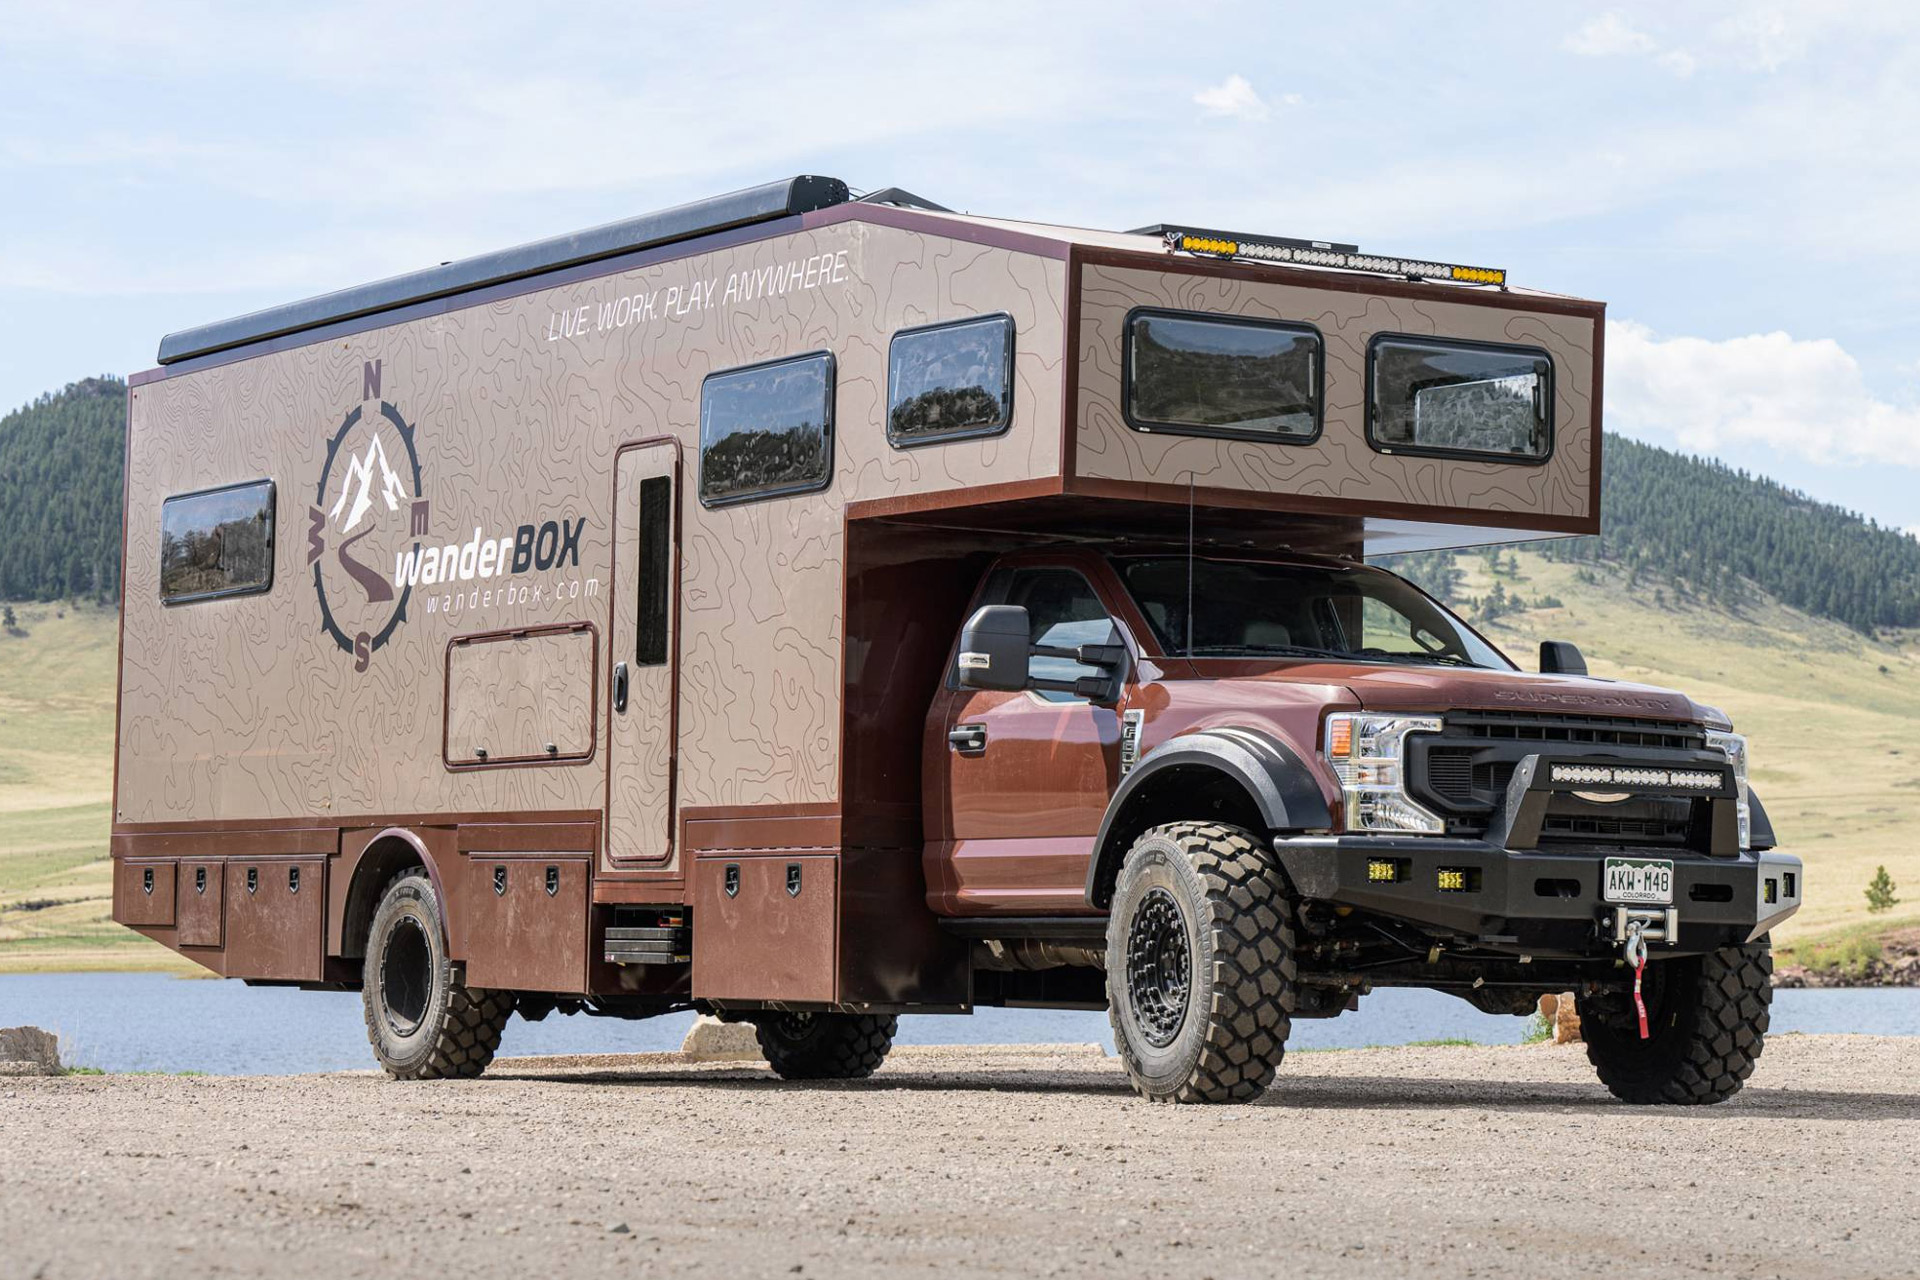 WanderBOX Outpost 35 4×4 RV, #WanderBOX #Outpost